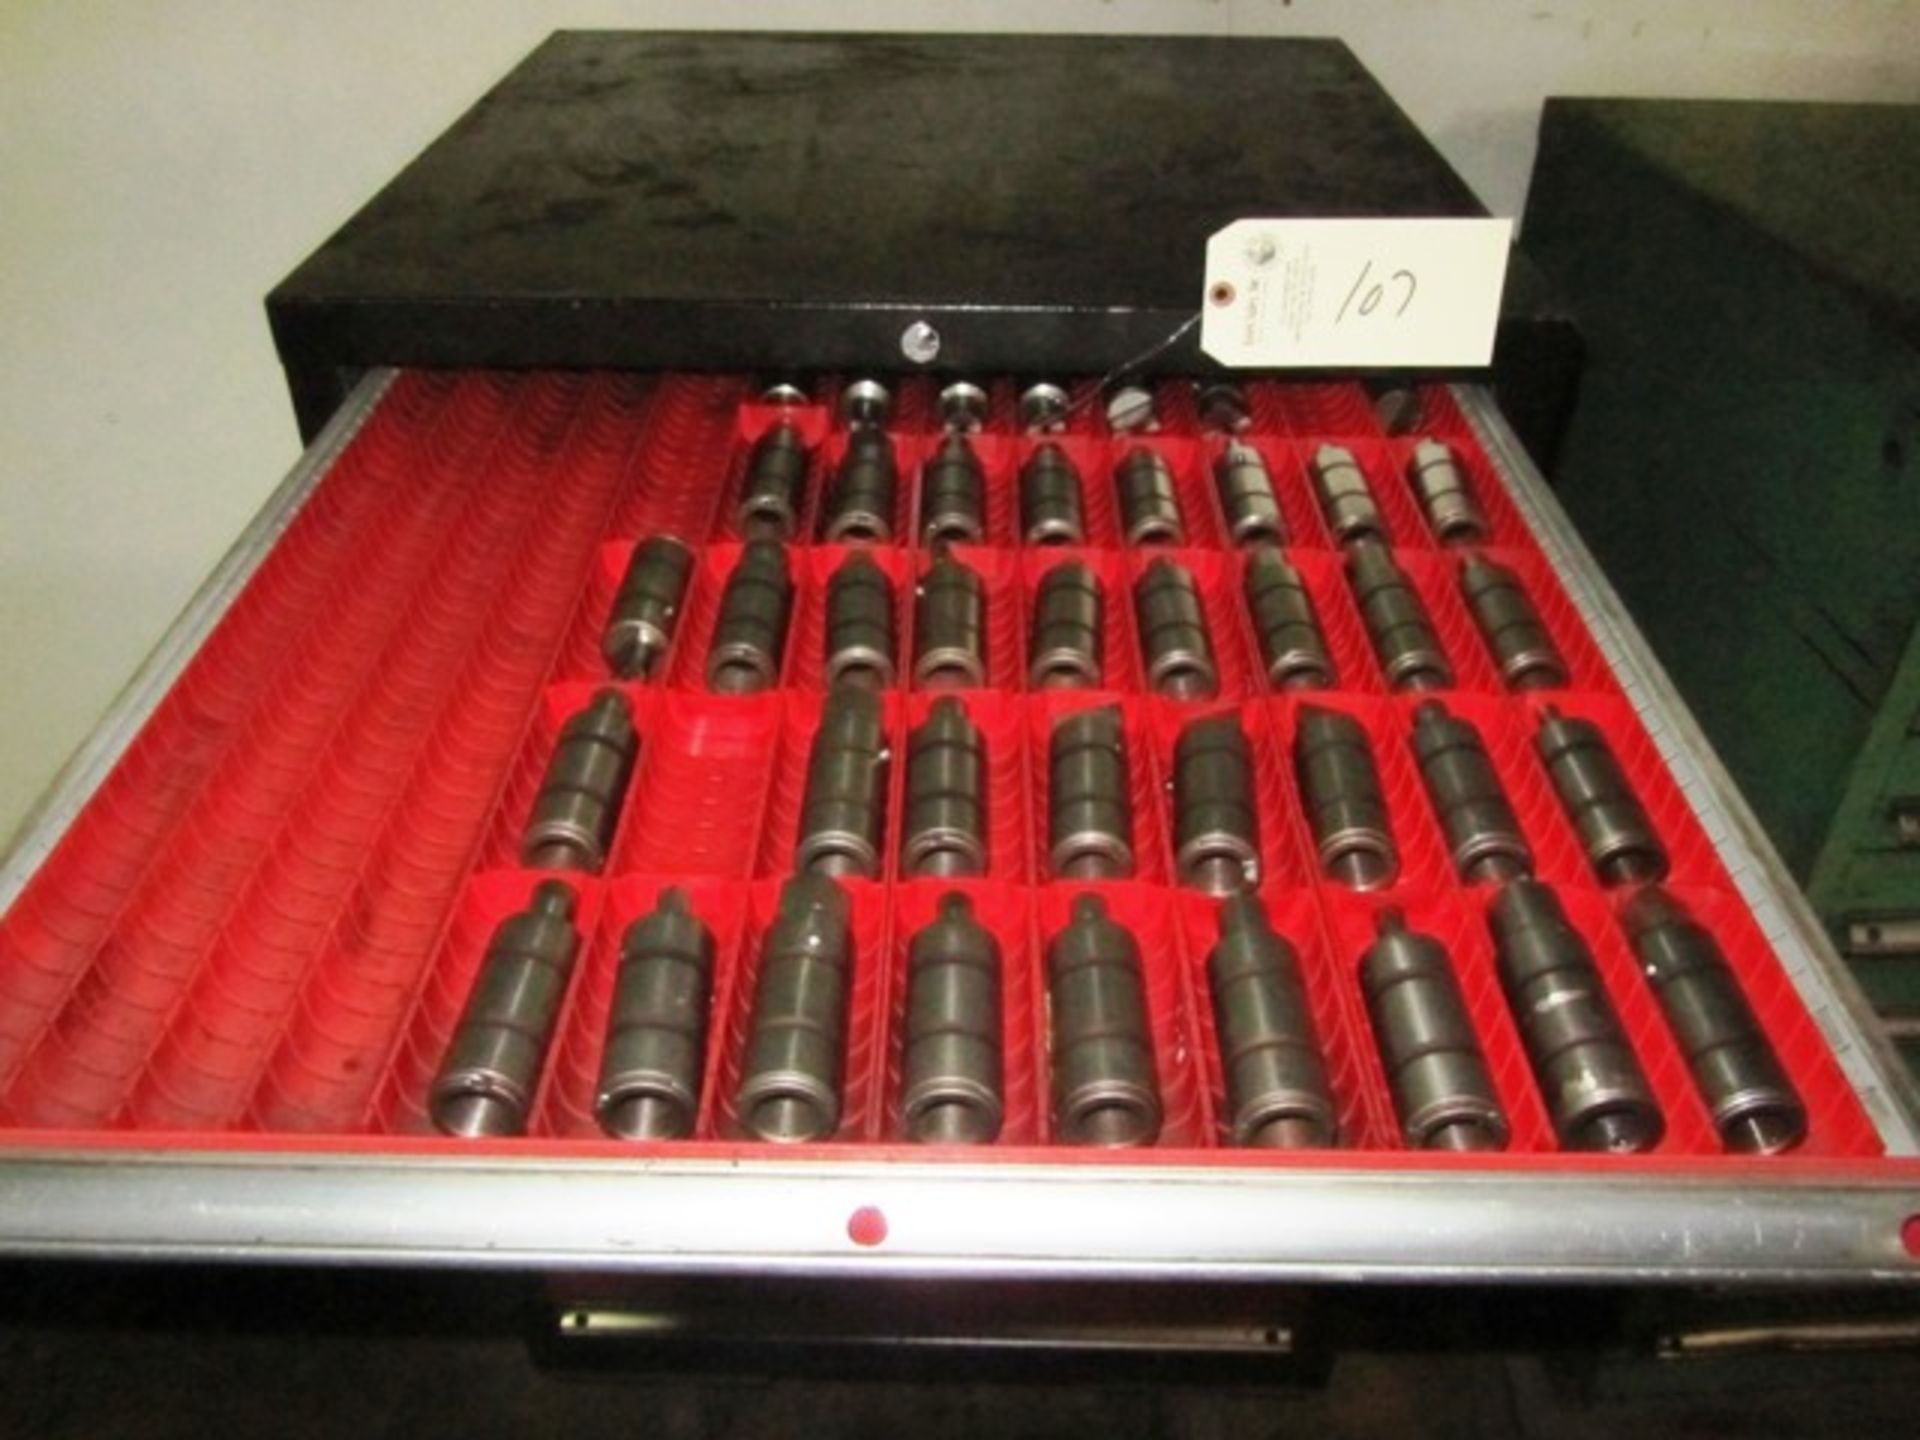 Amada 12 Drawer Portable Tool Cabinet with Punches & Dies - Image 2 of 5